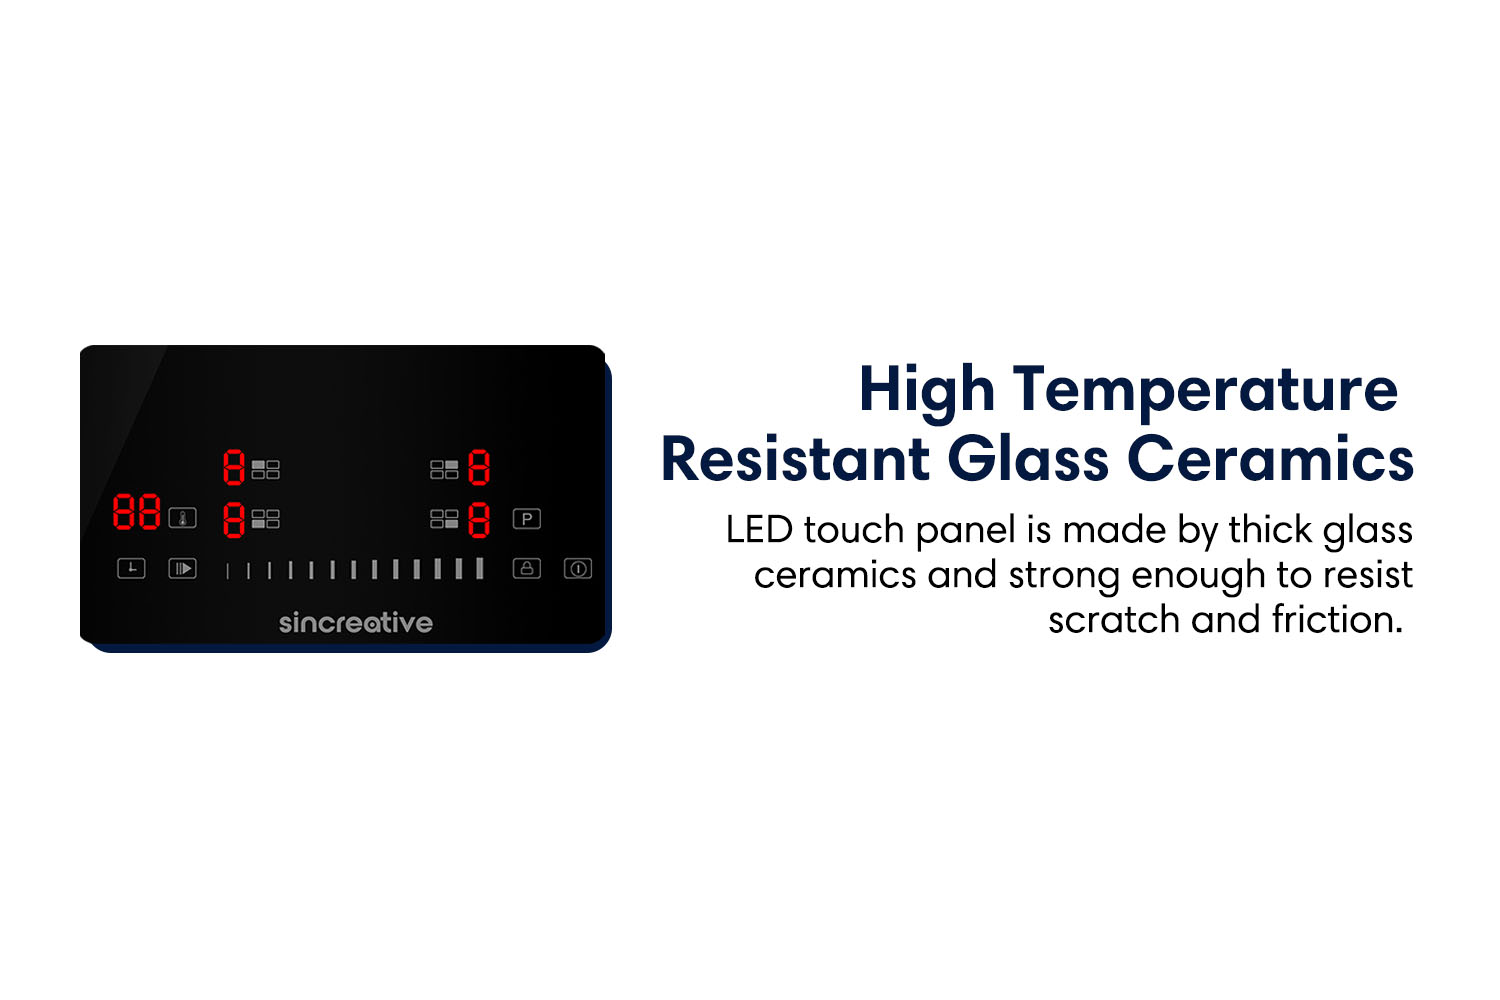 High Temperature resistant glass ceramics. LED touch panel is made by thick glass ceramics and strong enough to resist scratch and friction.